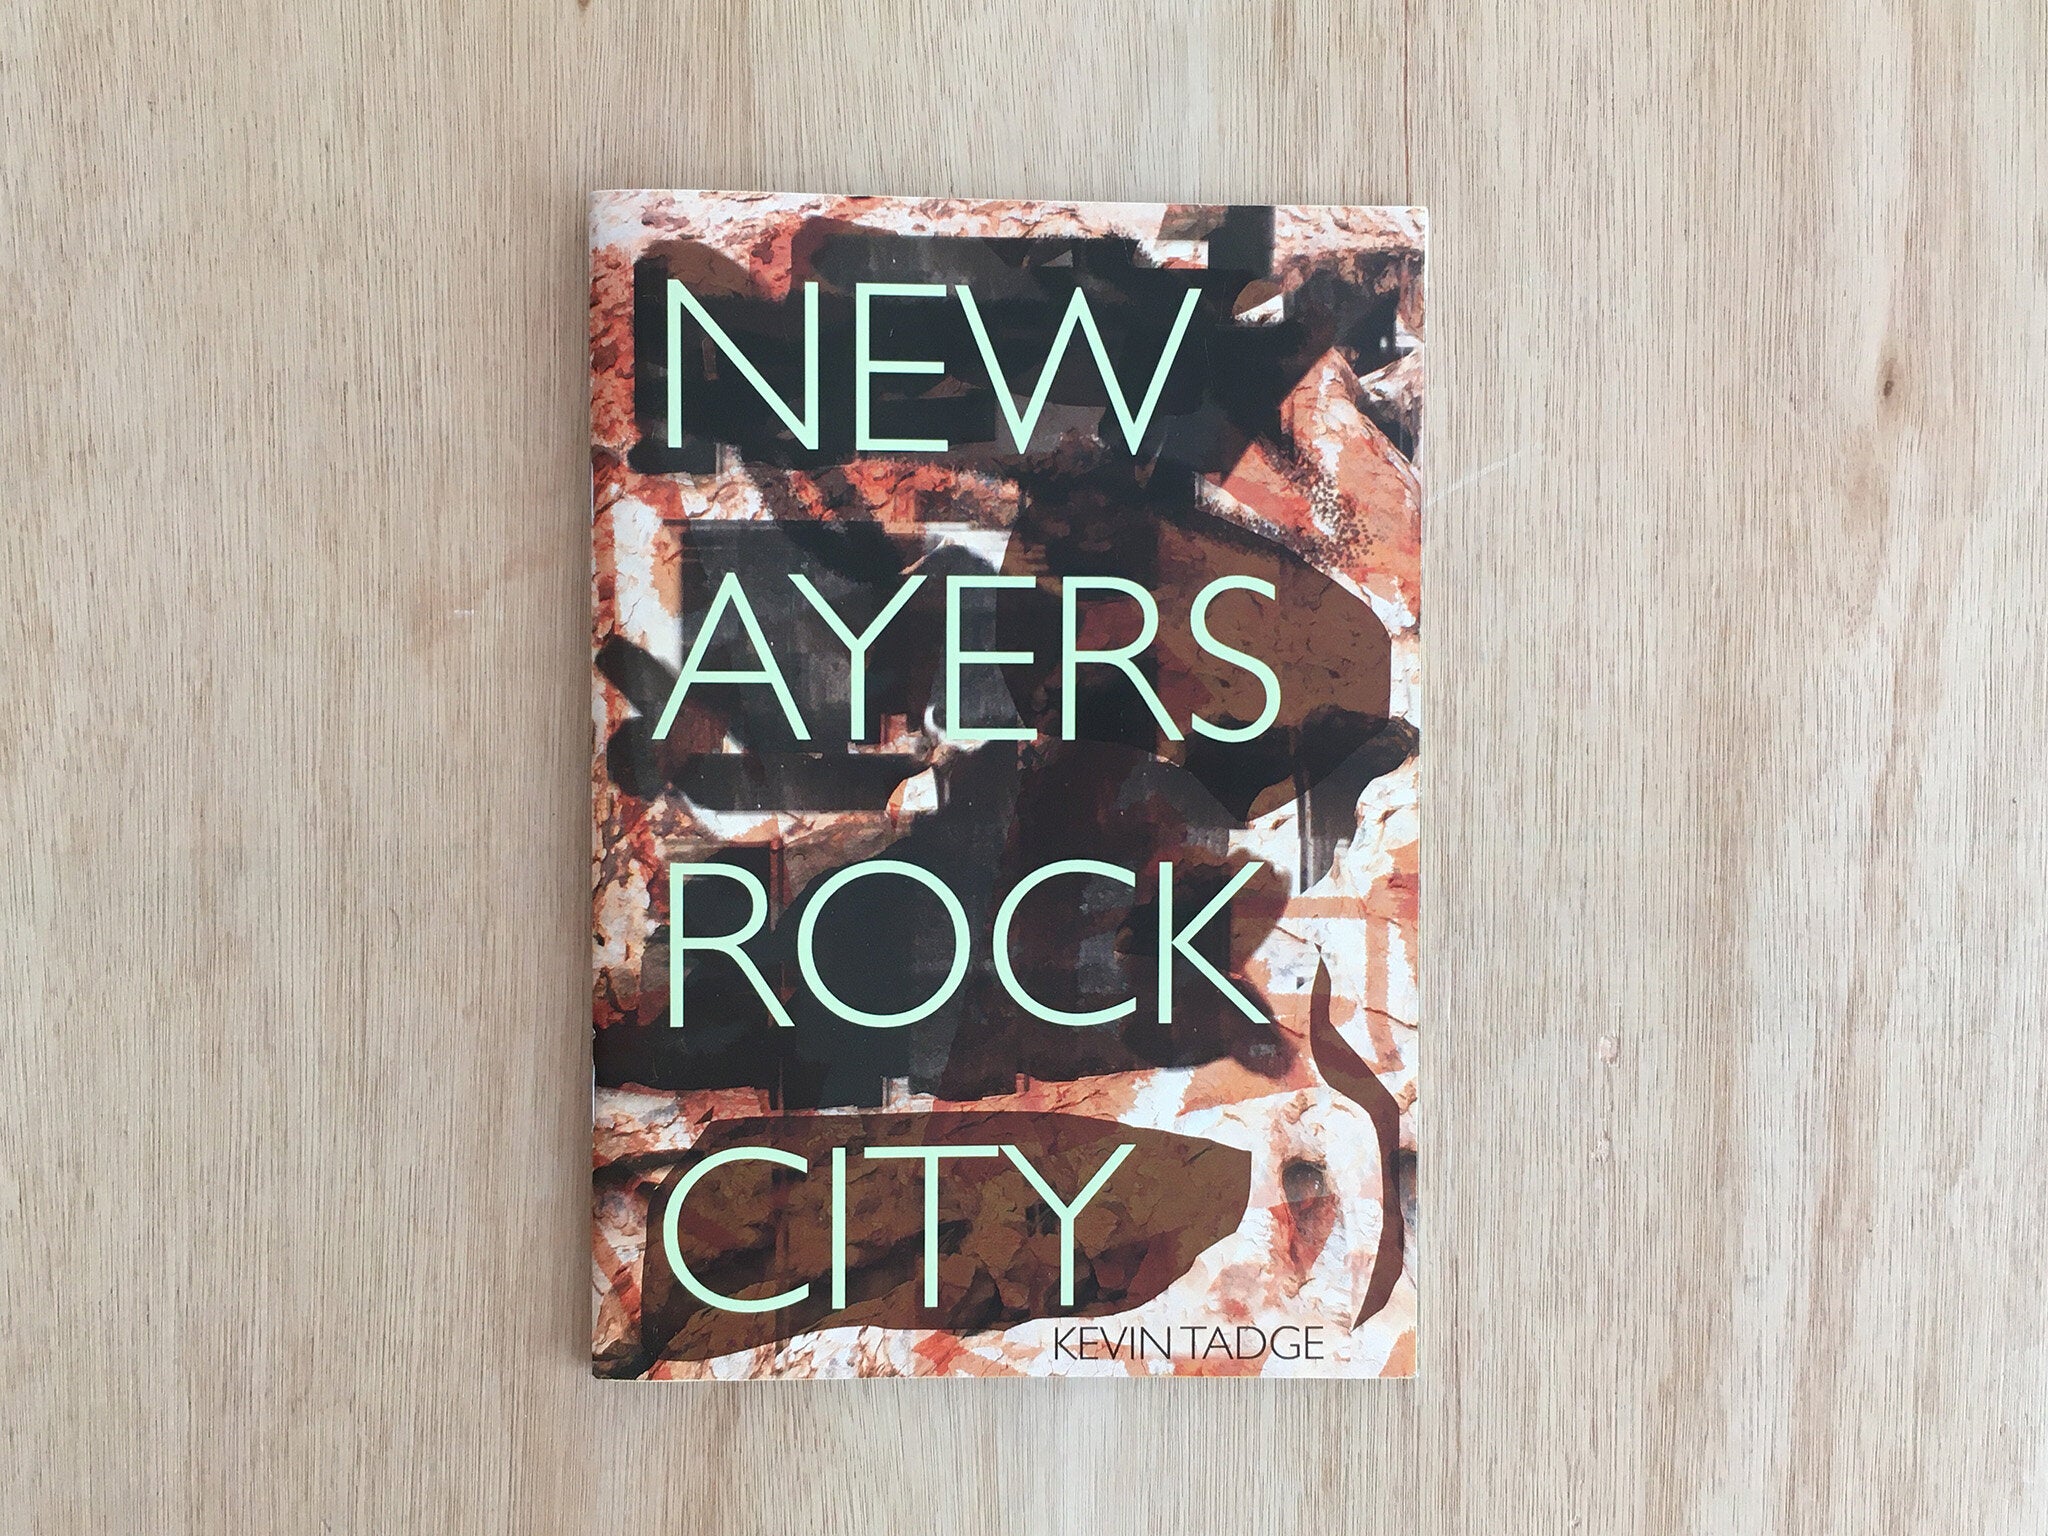 NEW AYERS ROCK CITY by Kevin Tadge